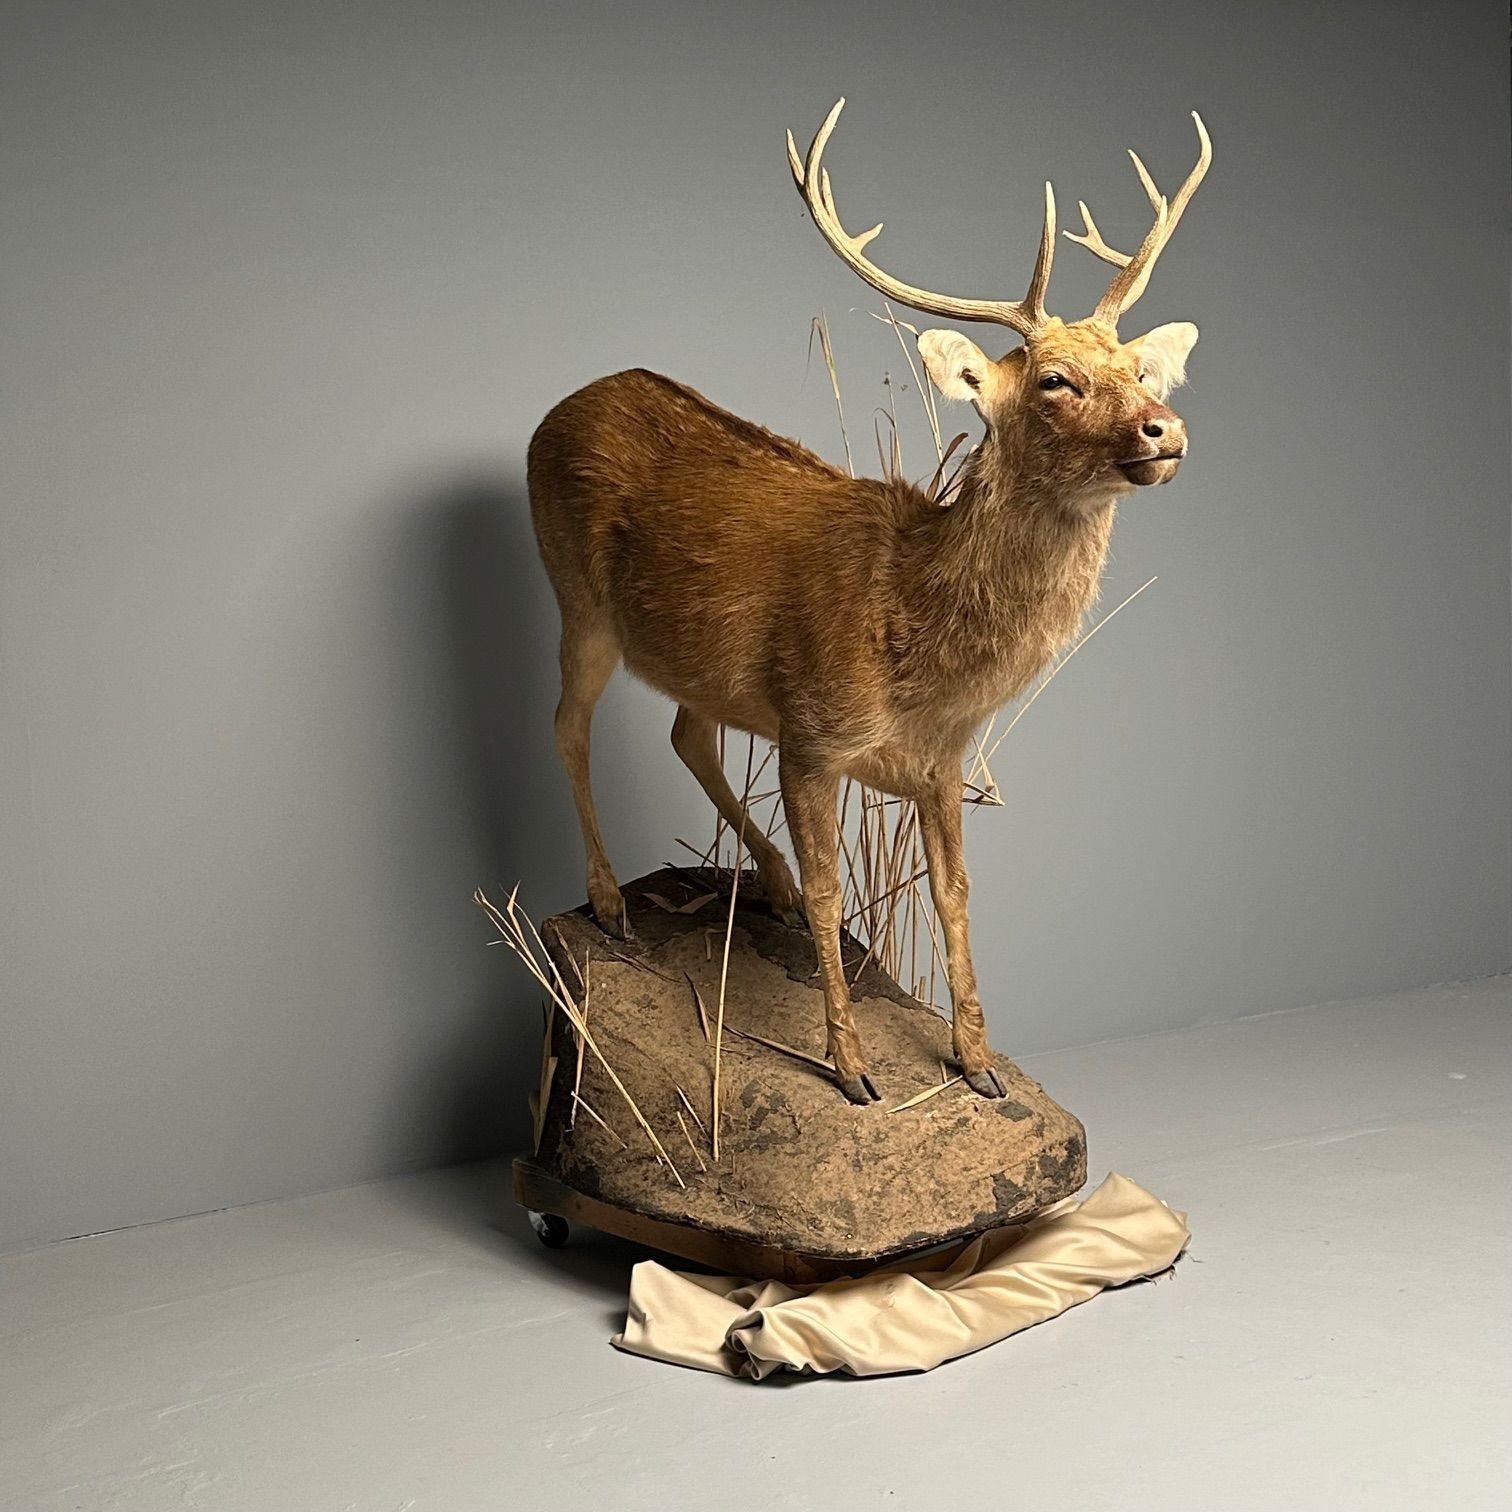 Life-Size Taxidermy Full Body Deer on Faux Concrete Base, Barasingha

Large and Impressive Full Body Barasingha (Indian Swamp Deer) Taxidermy Figure, set on faux base, dimensions are a height of 85 inches, length 80 inches, width 32 inches.

ZXA